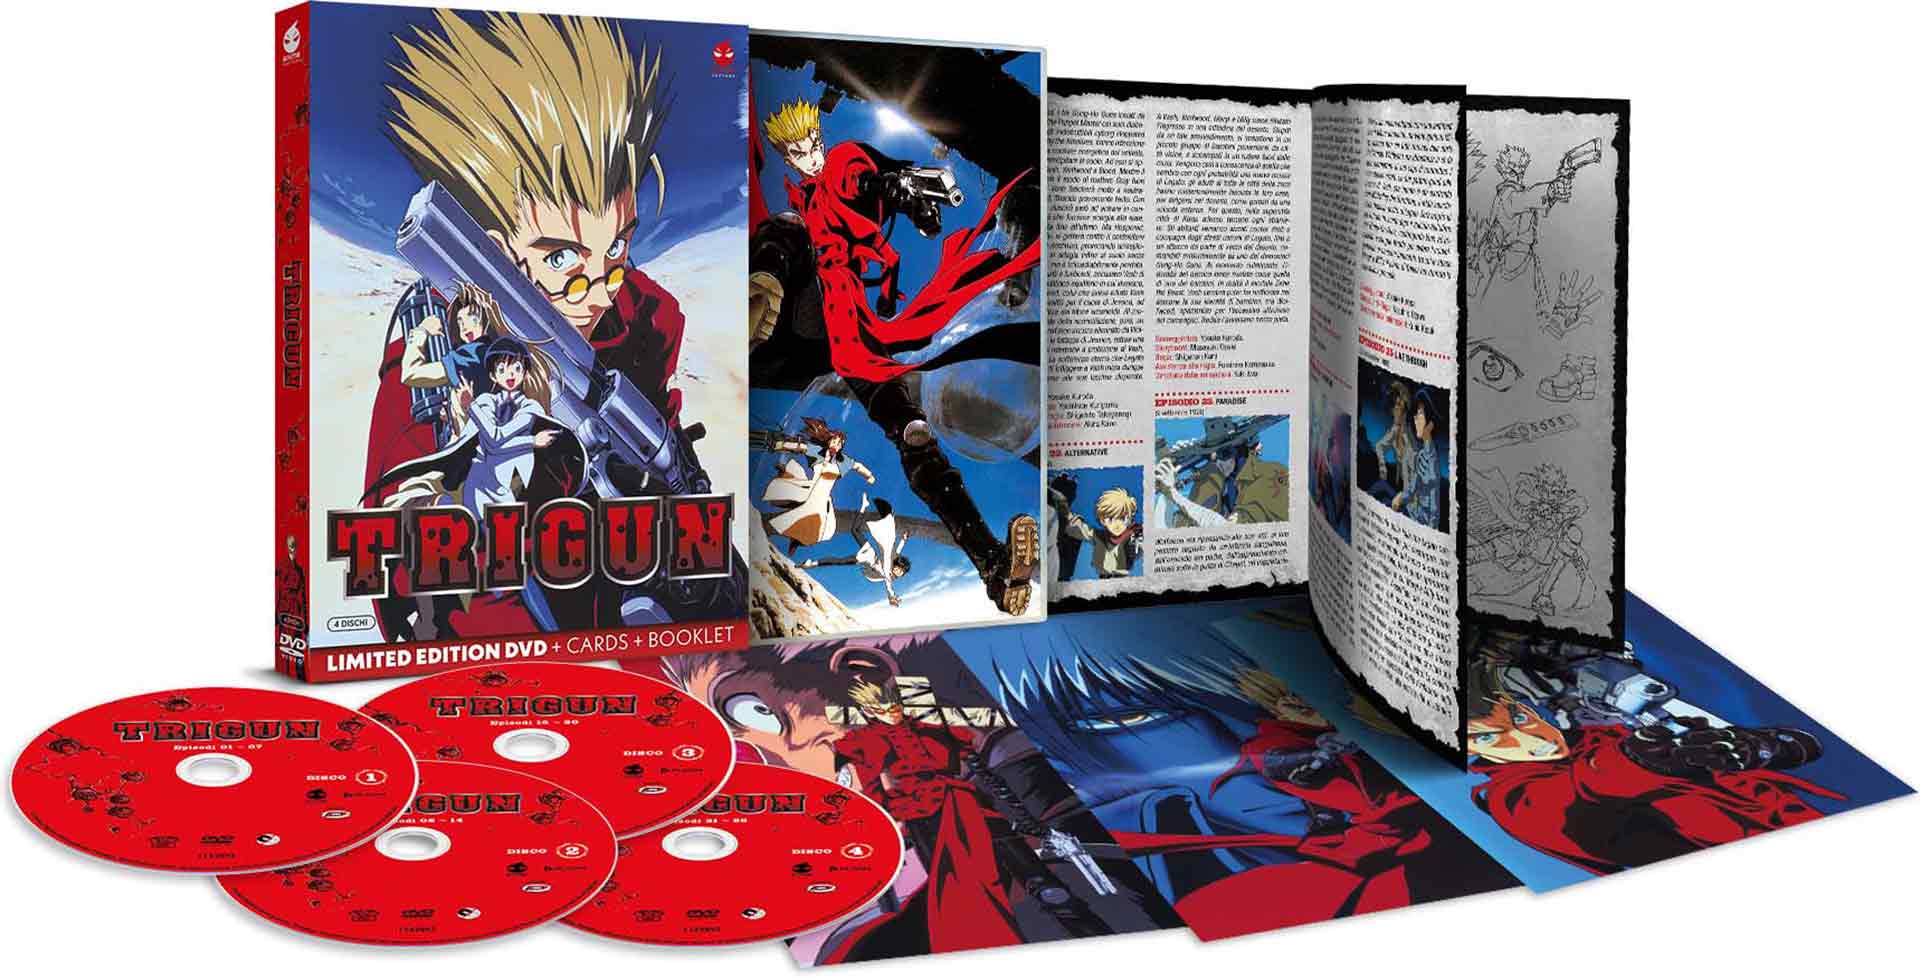 Trigun - Limited Edition Anime Factory 4 DVD + Cards + Booklet (DVD) Image 2